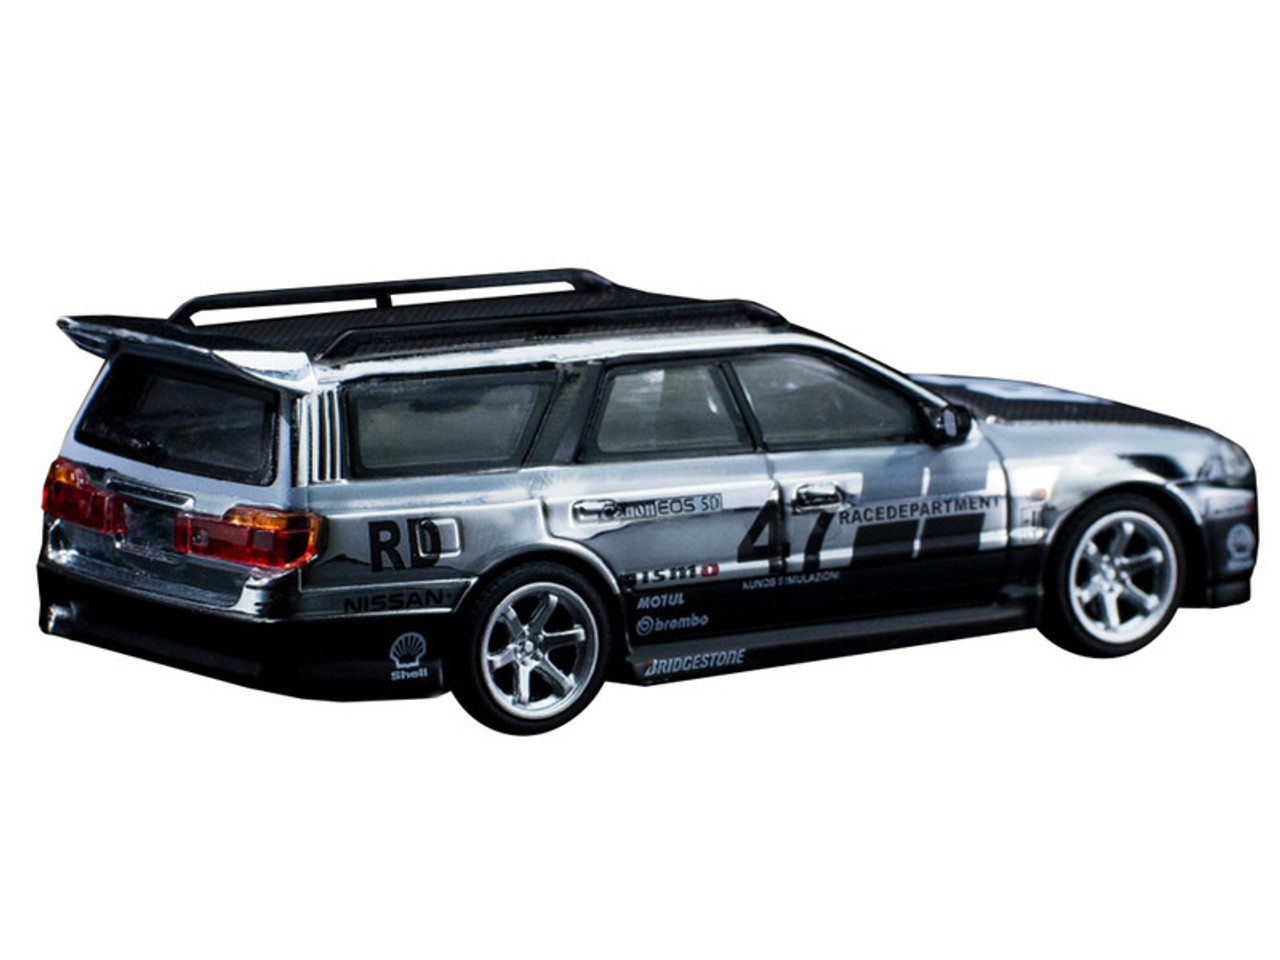 Nissan Stagea RHD (Right Hand Drive) #47 Race Department Chrome with Graphics 1/64 Diecast Model Car by Pop Race